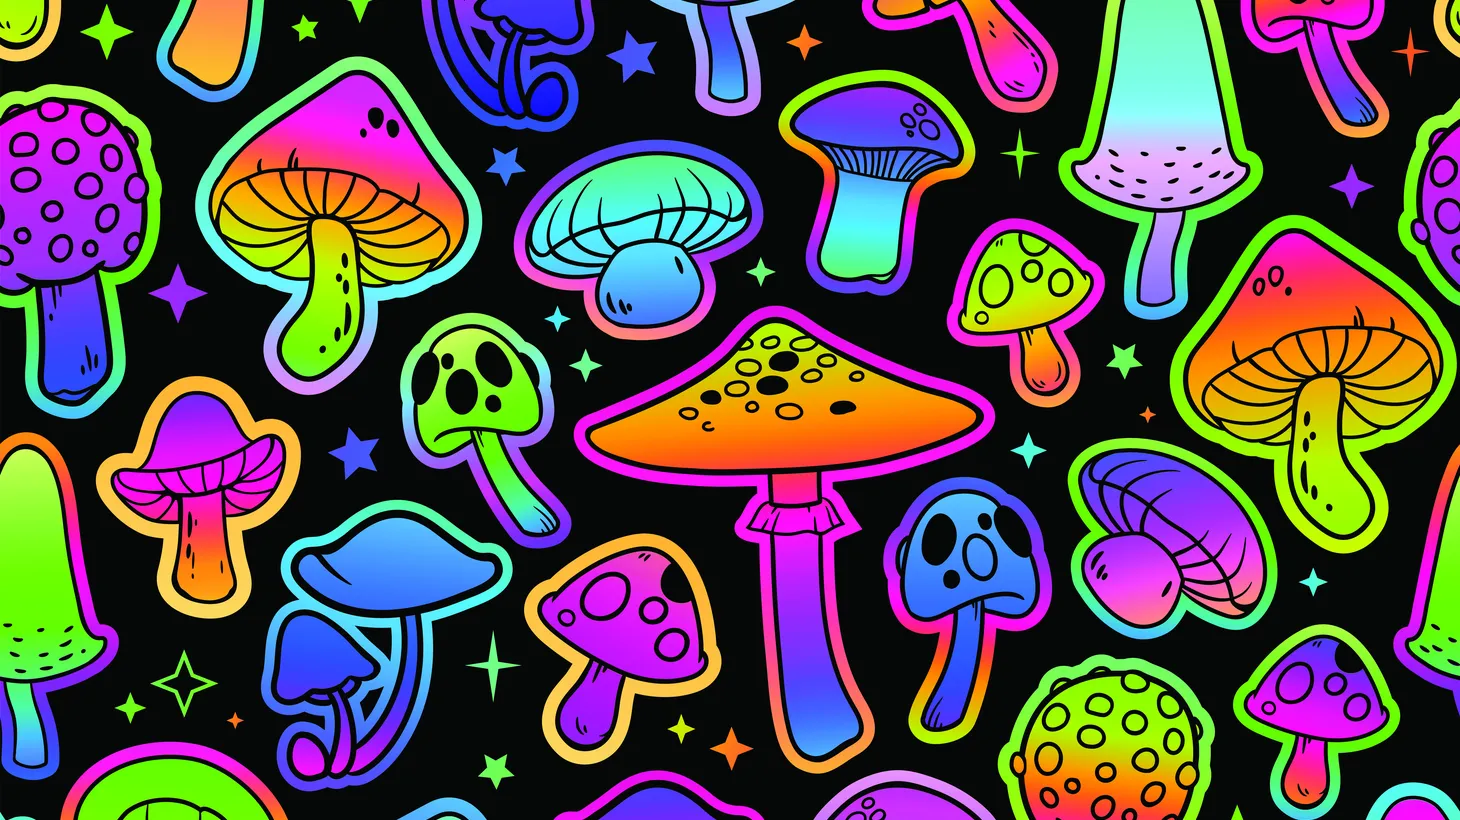 Variety of mushrooms in bright psychedelic colors.